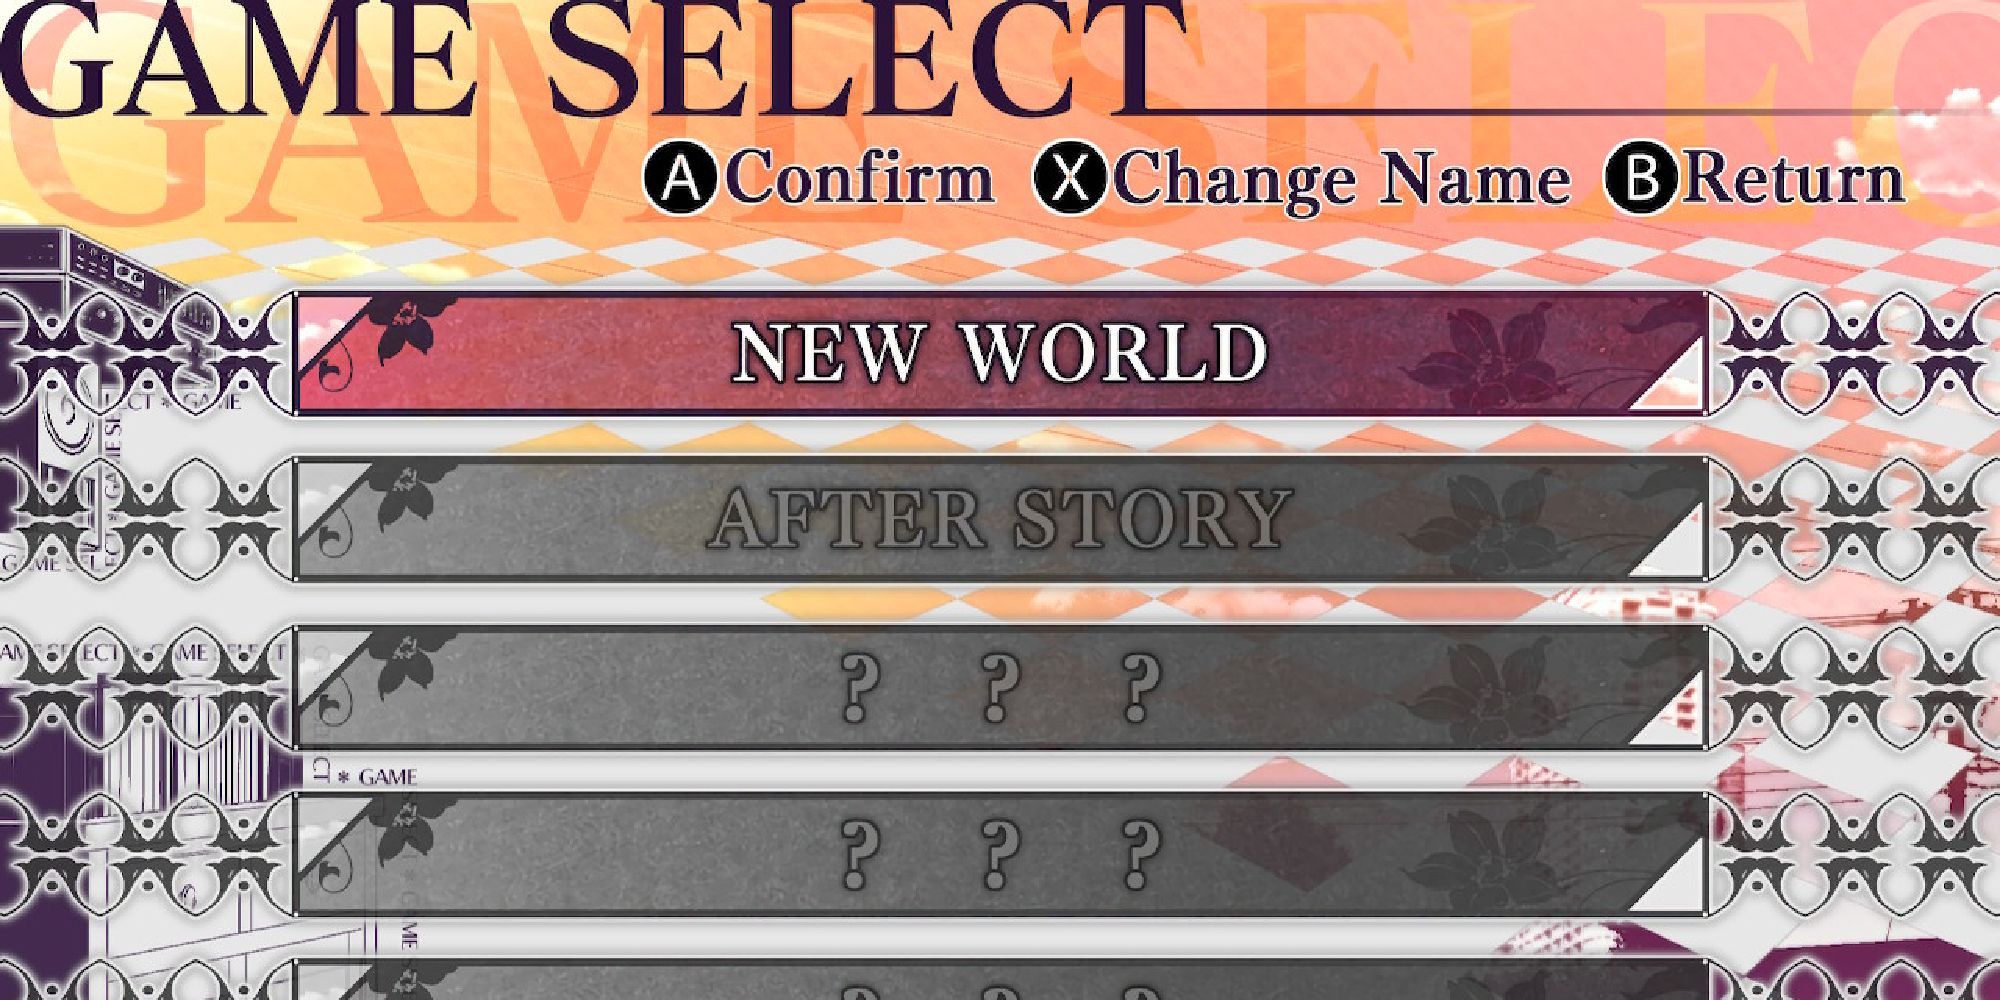 game select screen with new world and after story